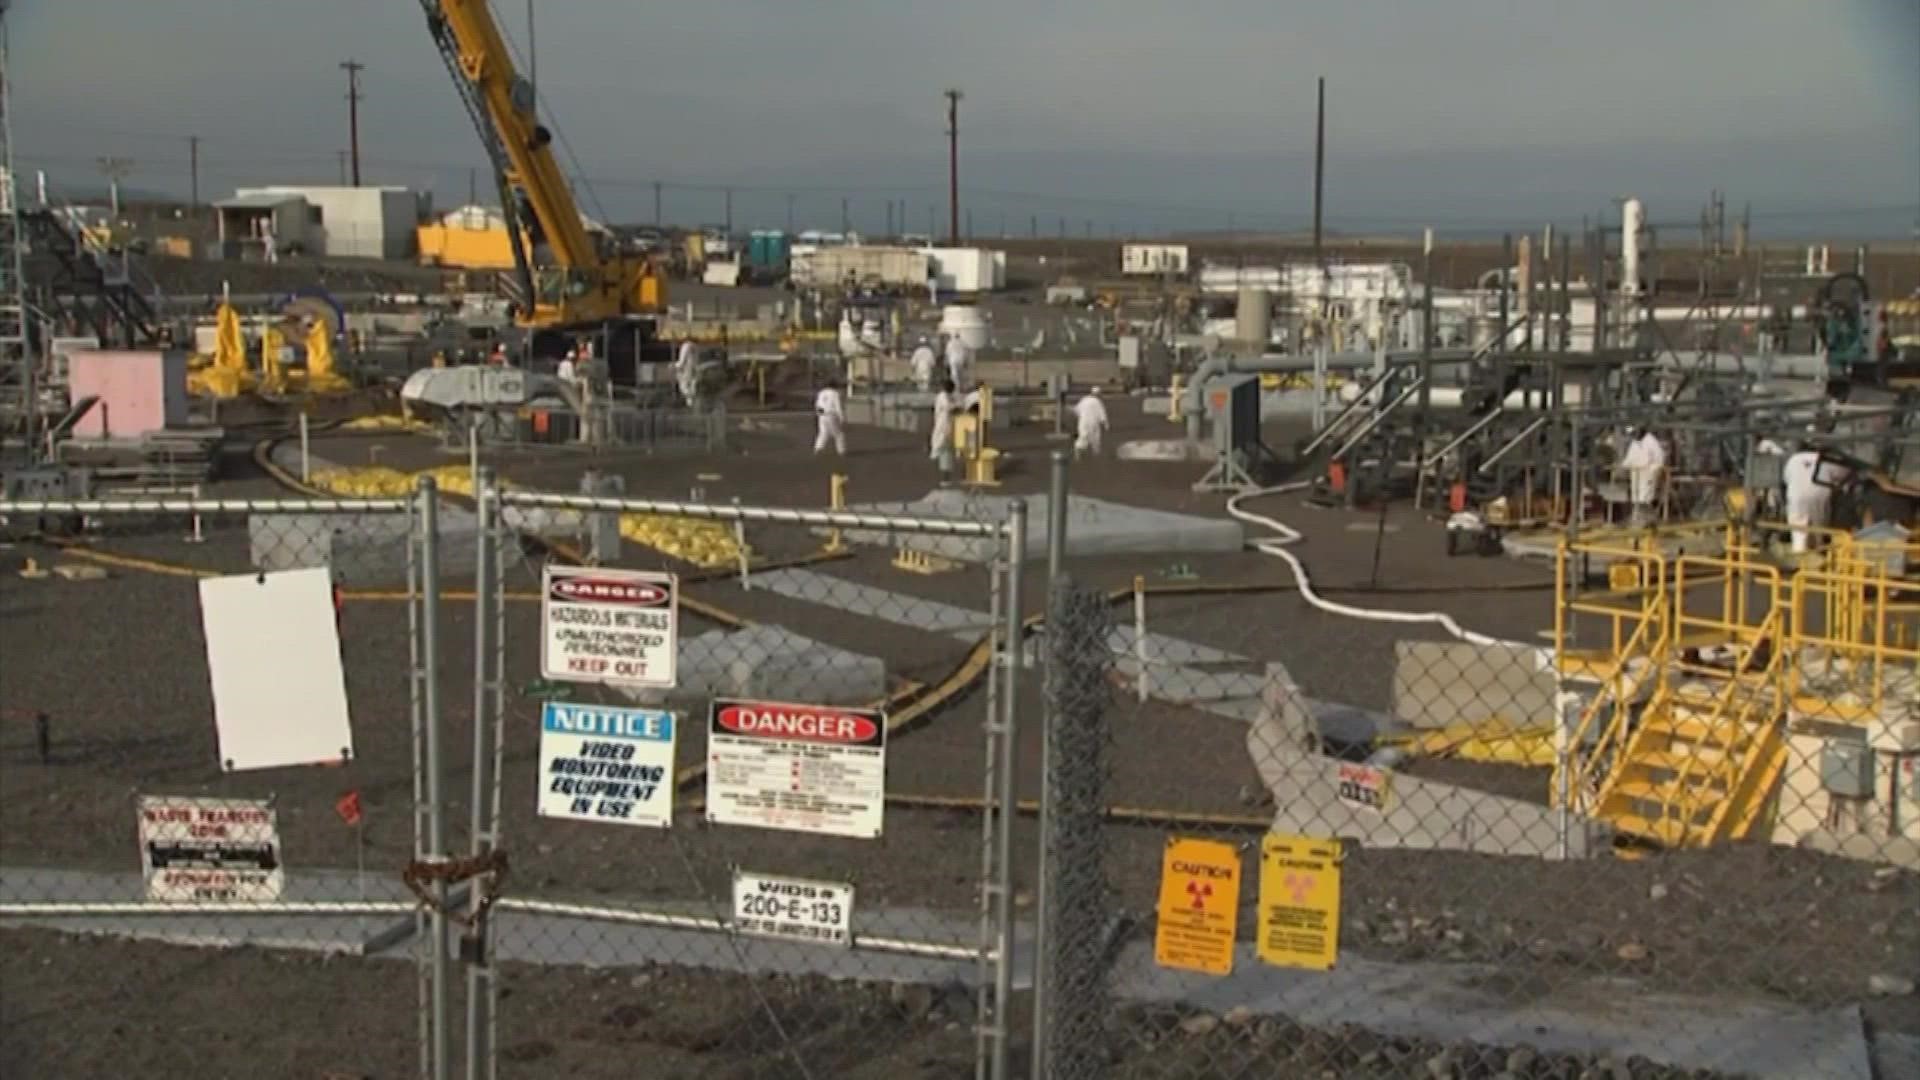 A bipartisan group of Washington state legislators sent a letter of protest to President Joe Biden urging a stop to strike down a state law to aide Hanford workers.